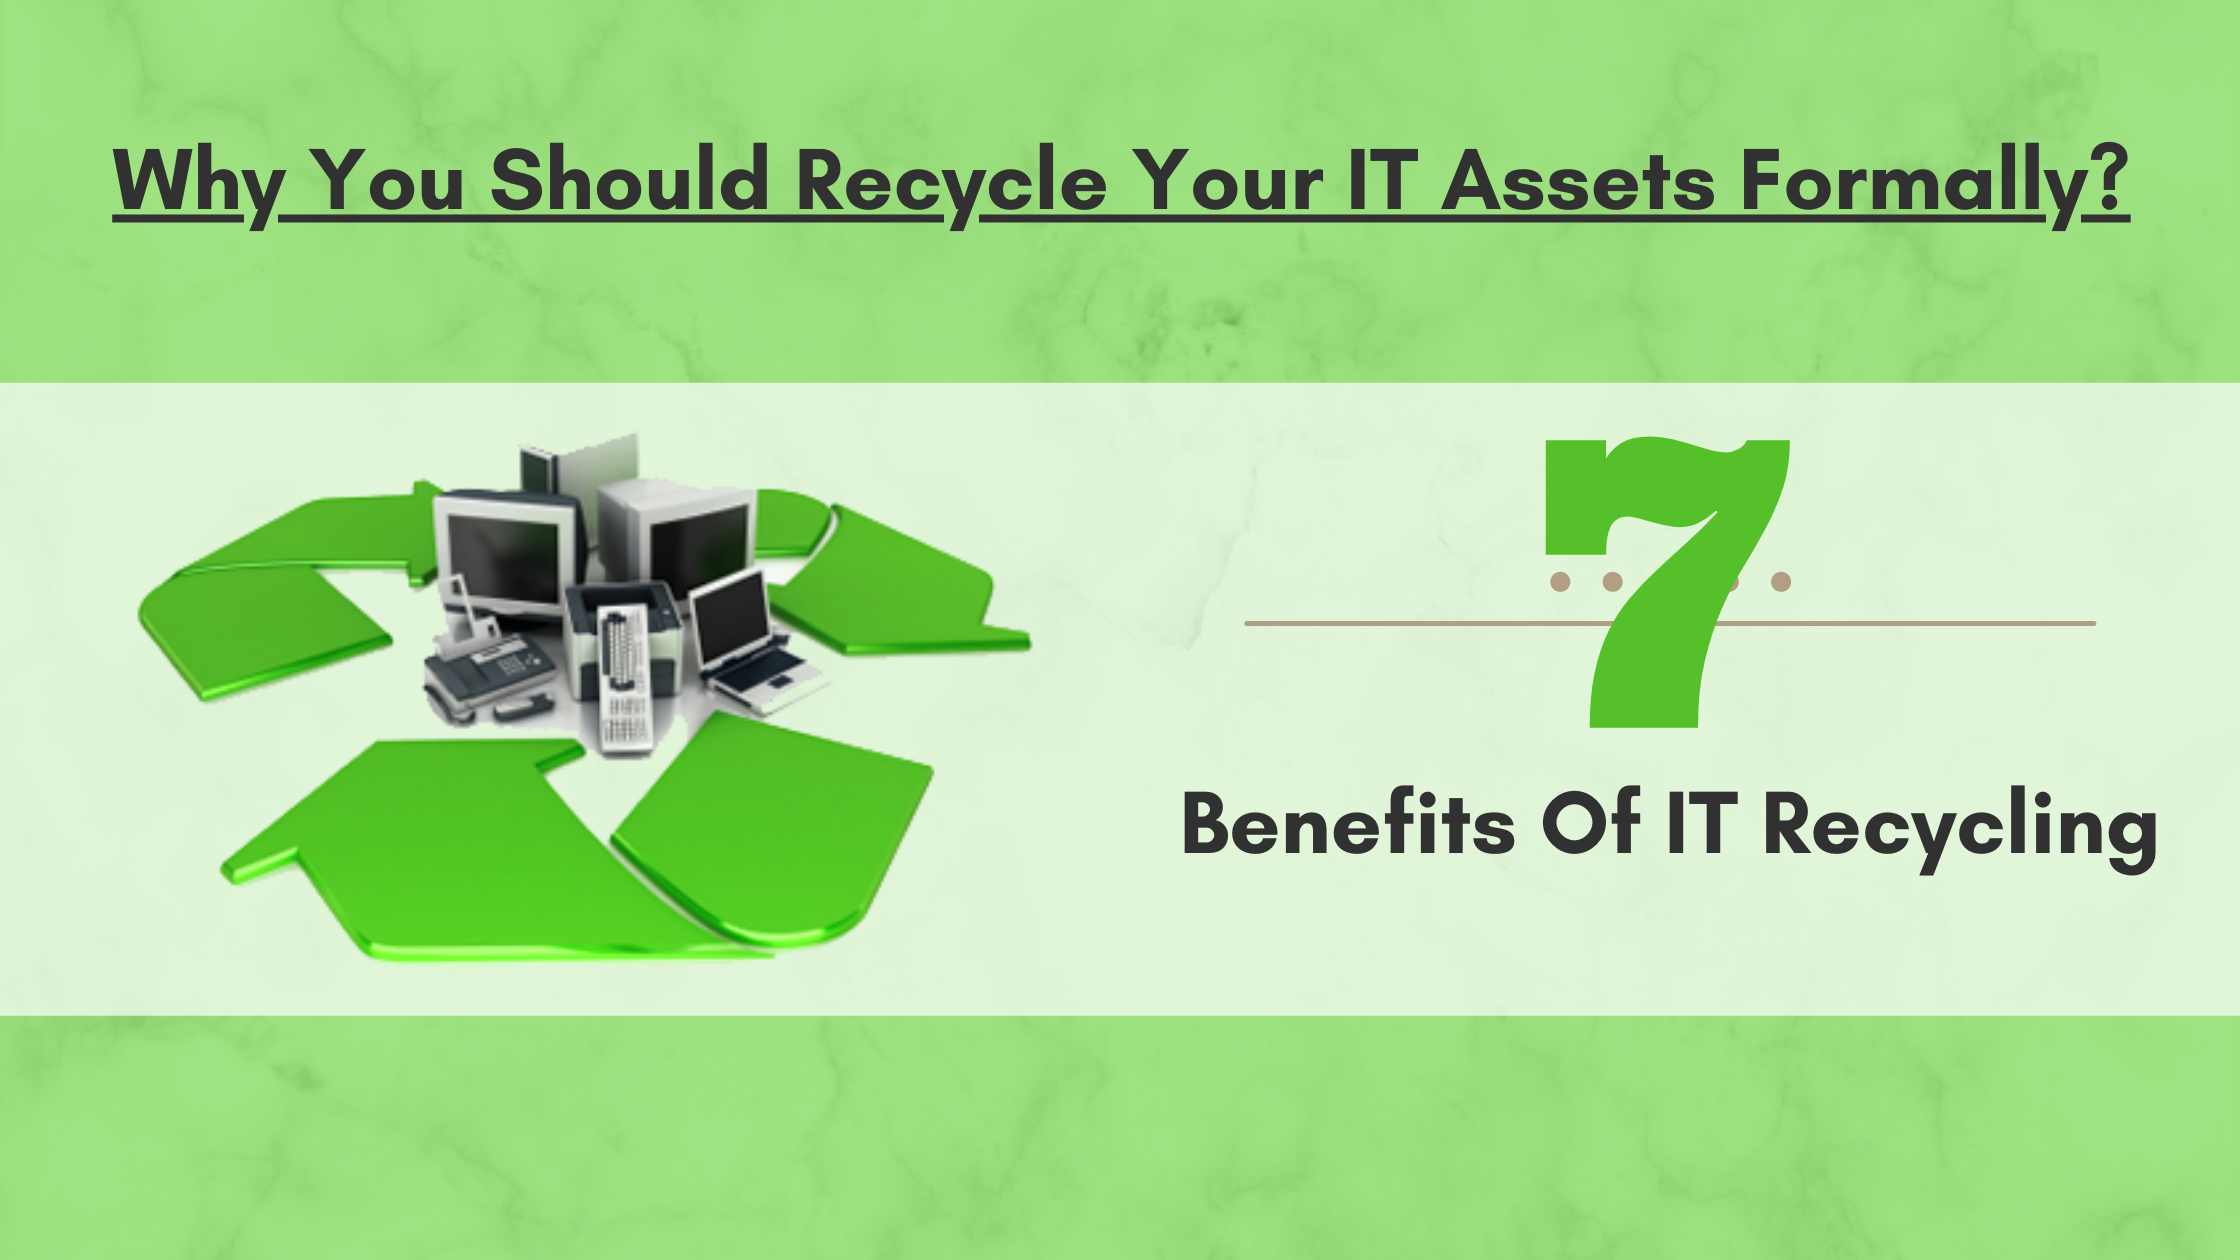 The 7 Benefits Of IT Recycling Why You Should Recycle Your IT Assets Formally